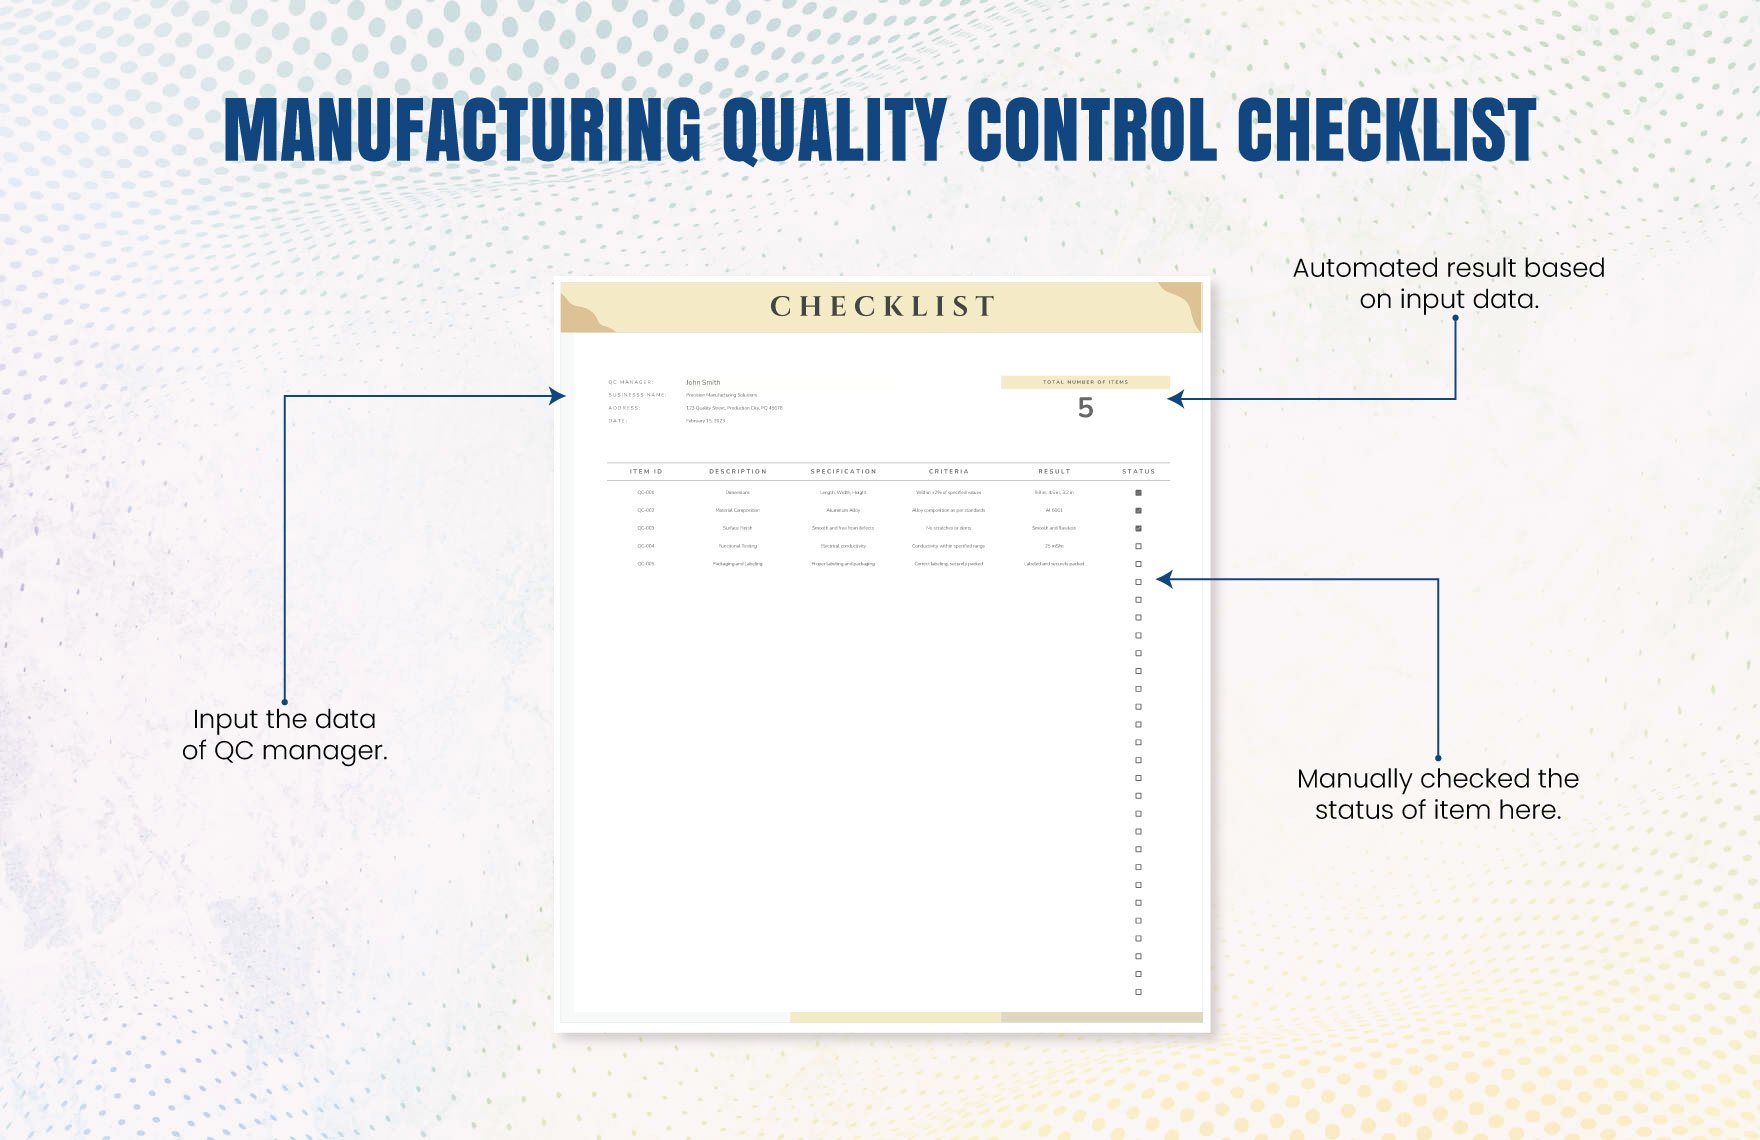 Manufacturing Quality Control Checklist Template in Excel Google